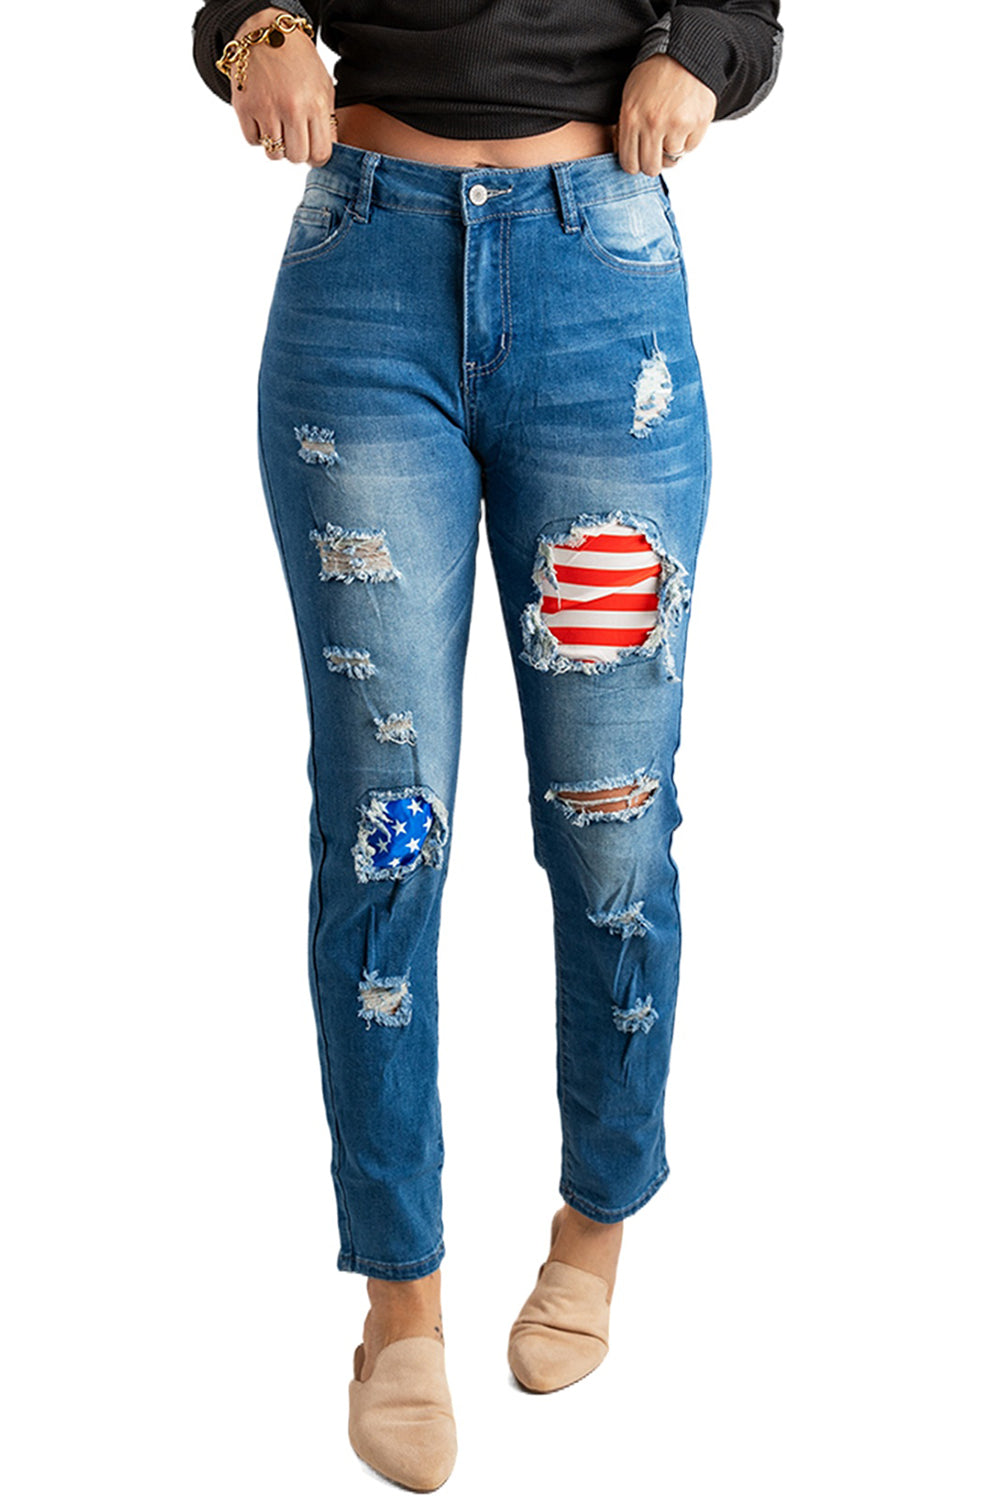 Stripes and Stars Patches Ripped Jeans